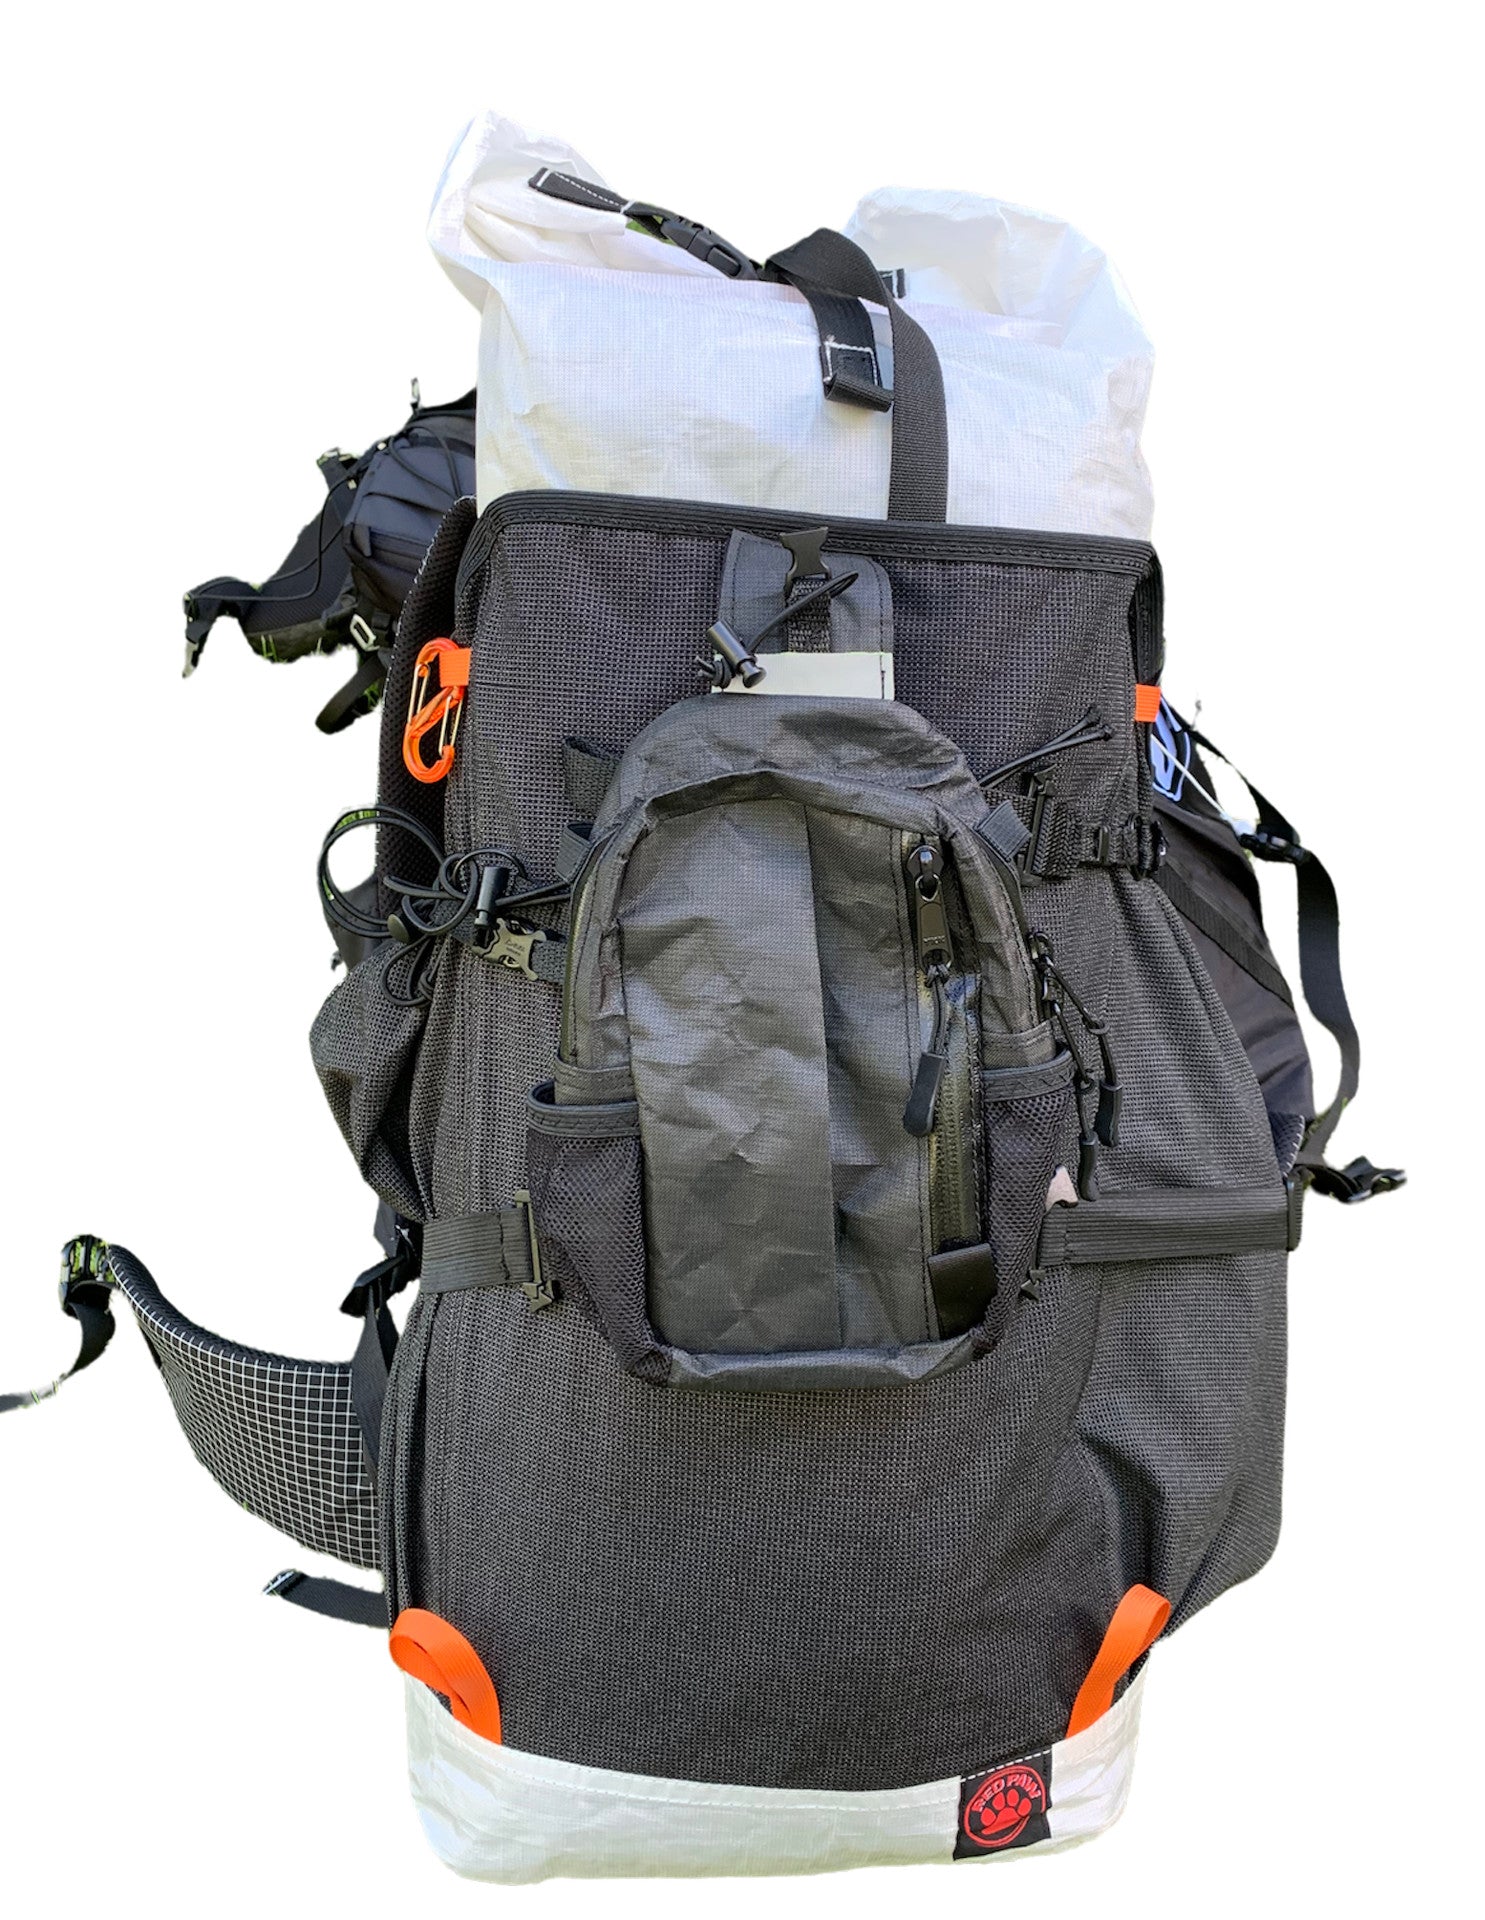 Athletipack Attached to a Backpack